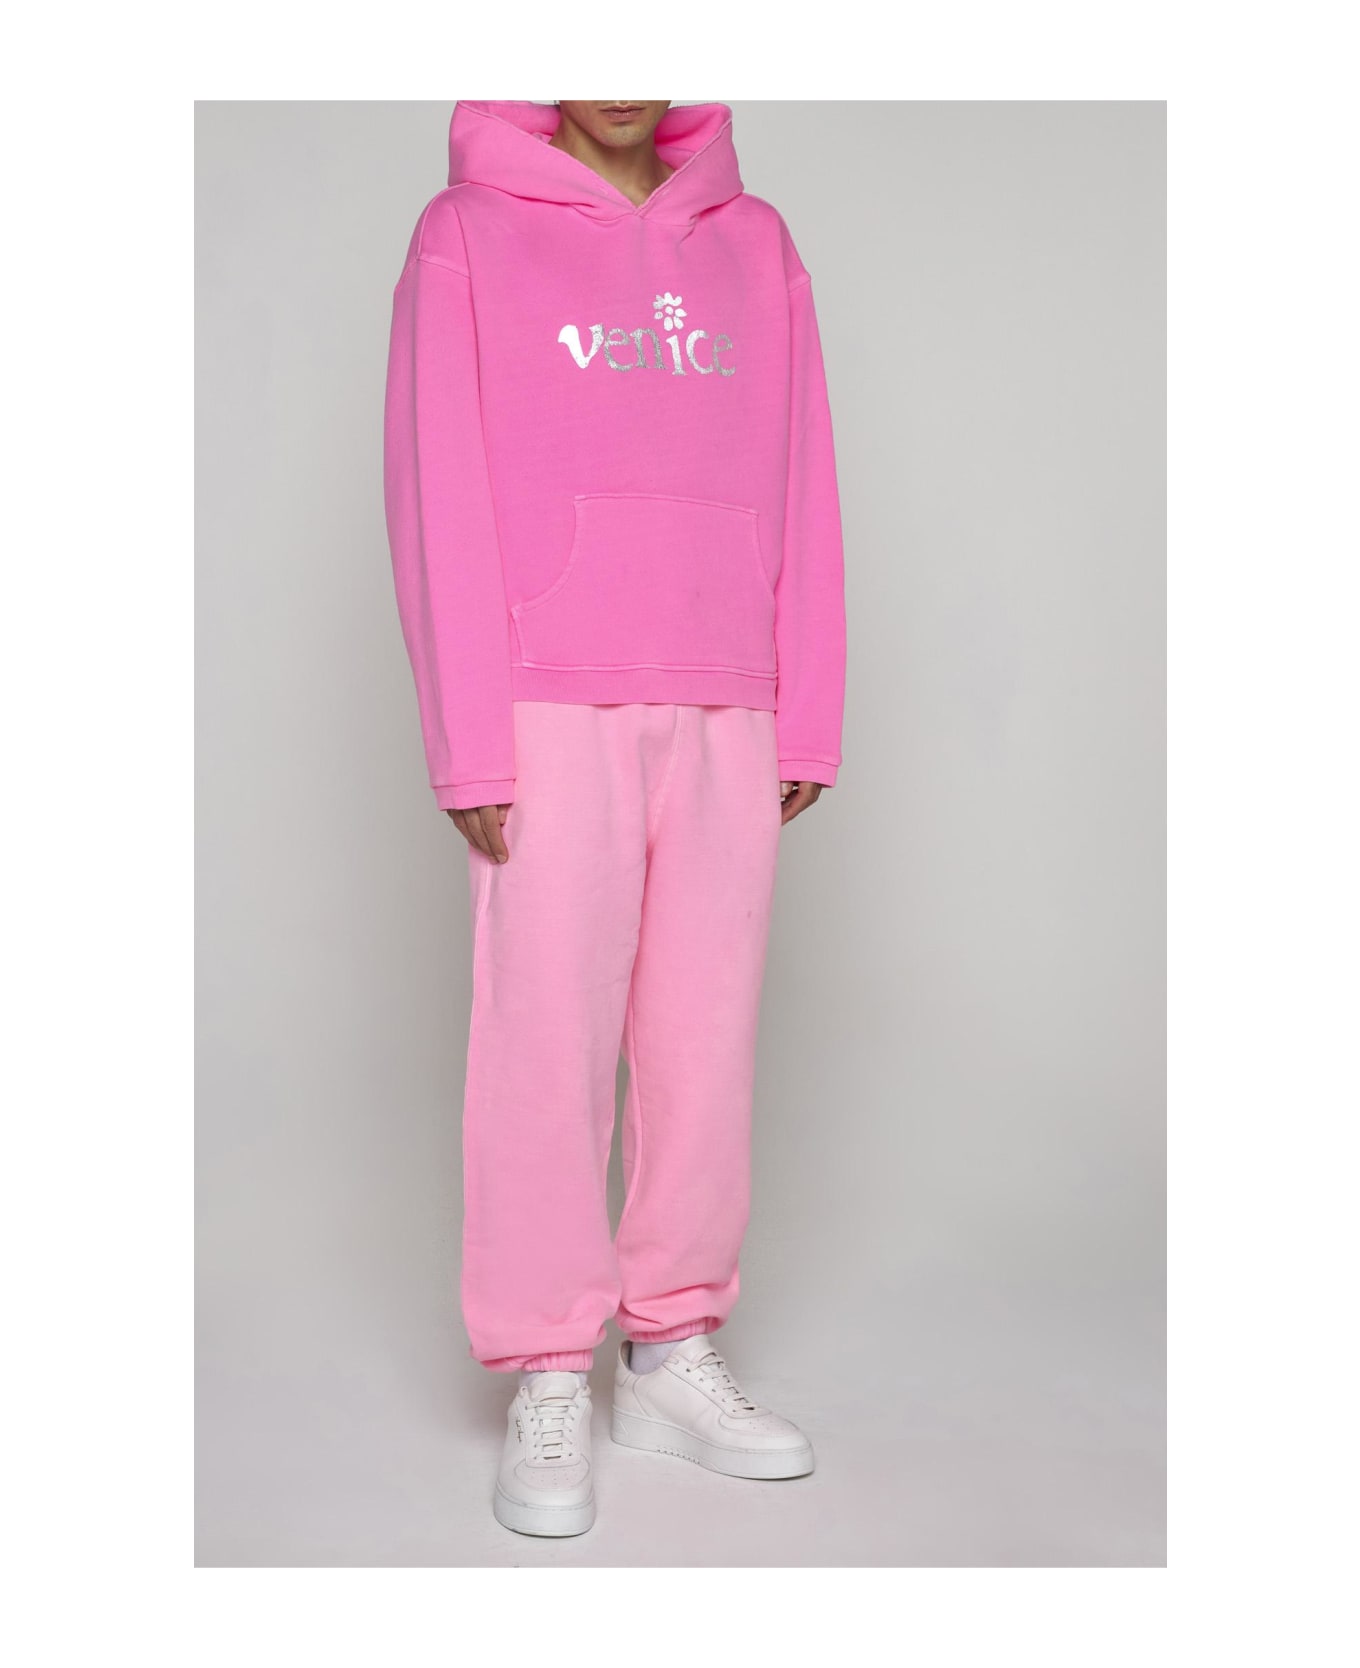 ERL Venice Cotton Hoodie - Pink フリース